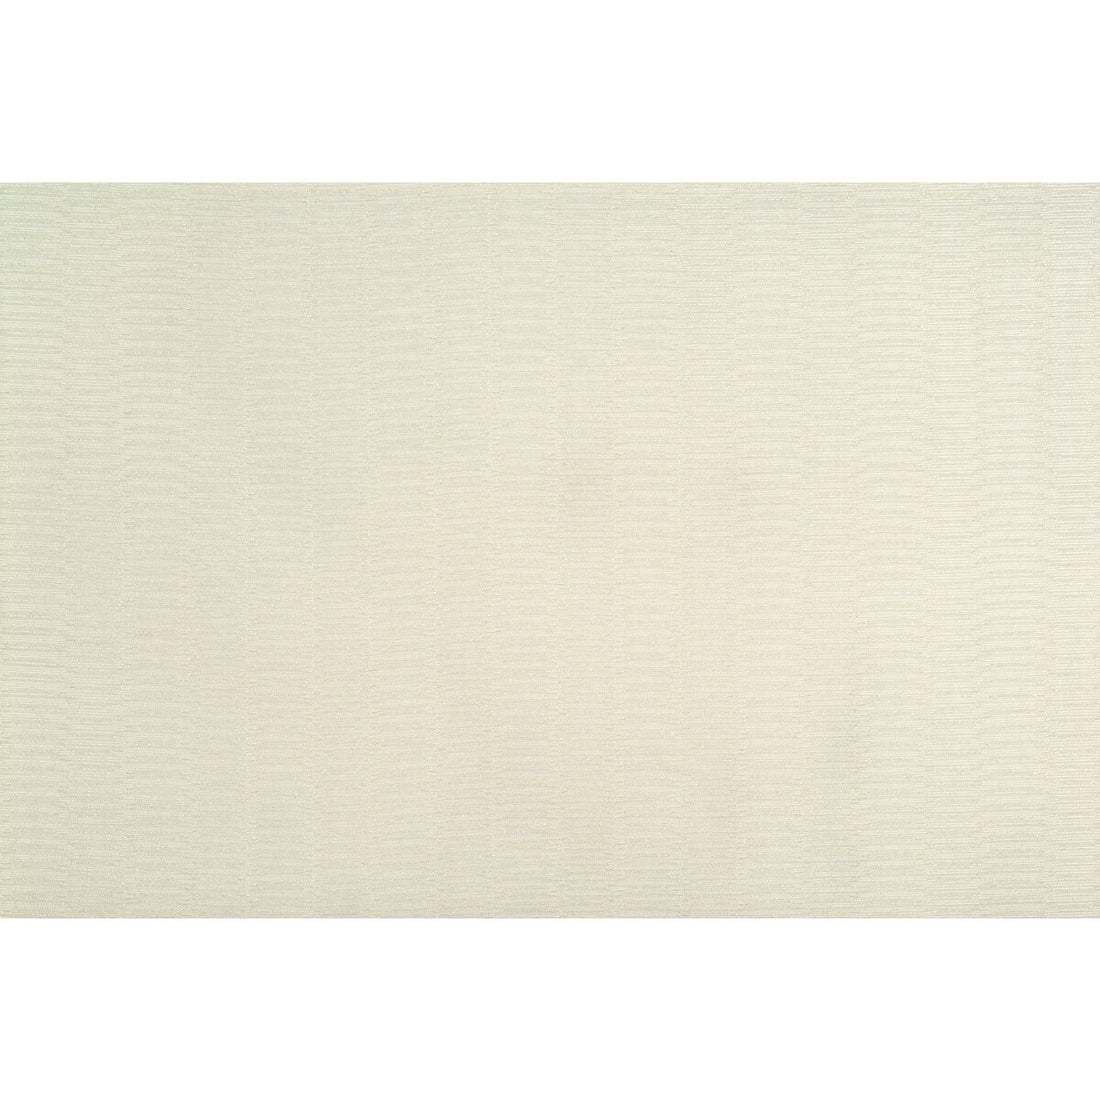 Thelma fabric in ivory color - pattern 4286.1.0 - by Kravet Contract